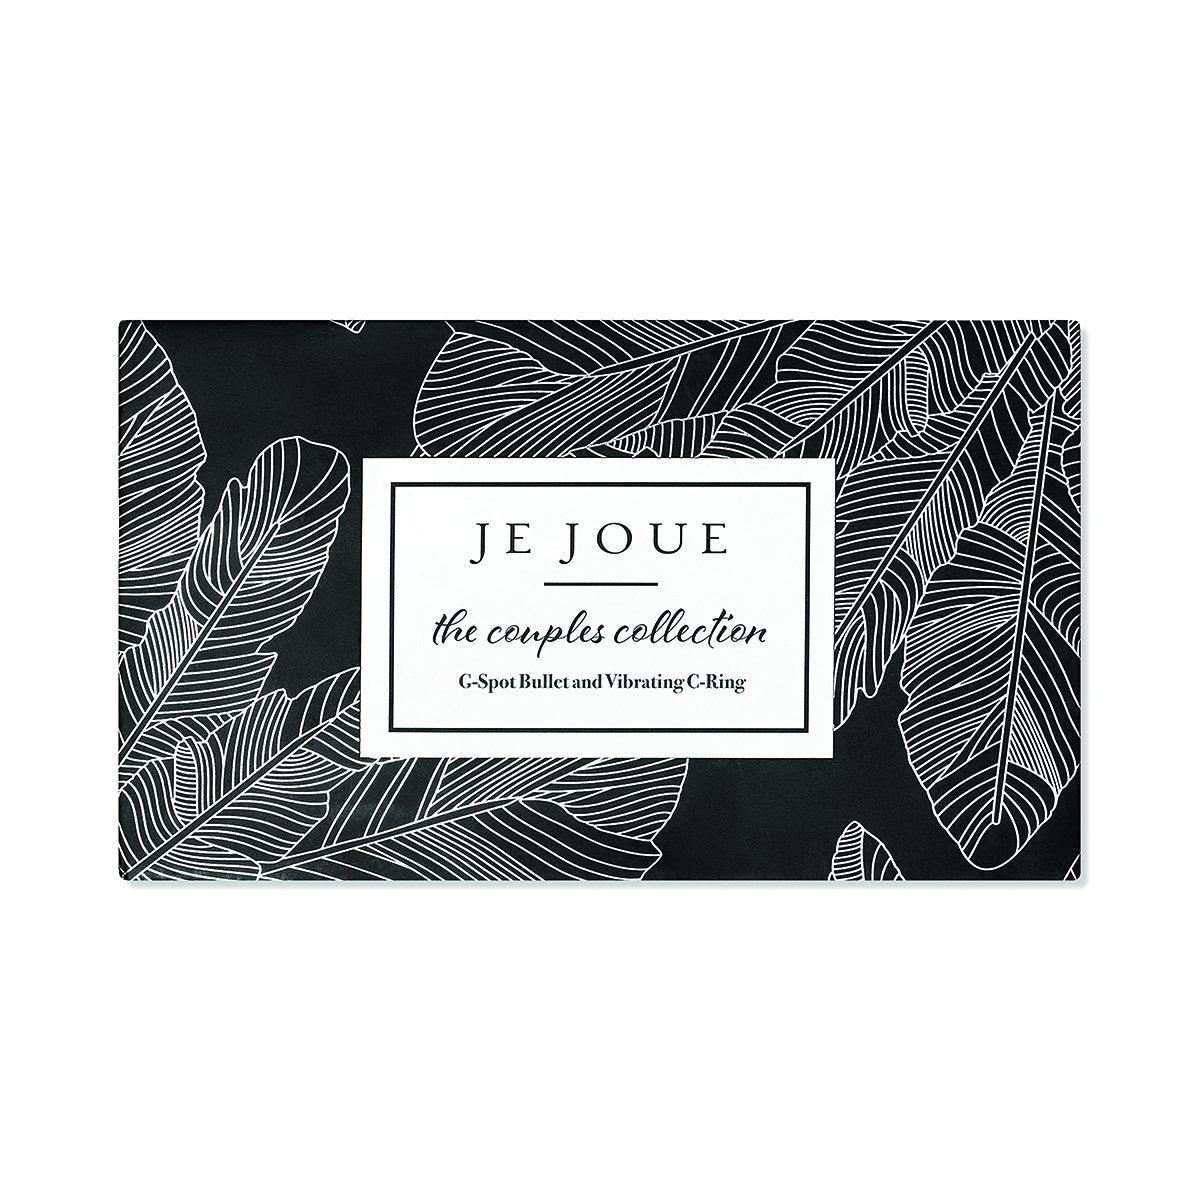 Je Joue Couples Collection - Buy At Luxury Toy X - Free 3-Day Shipping